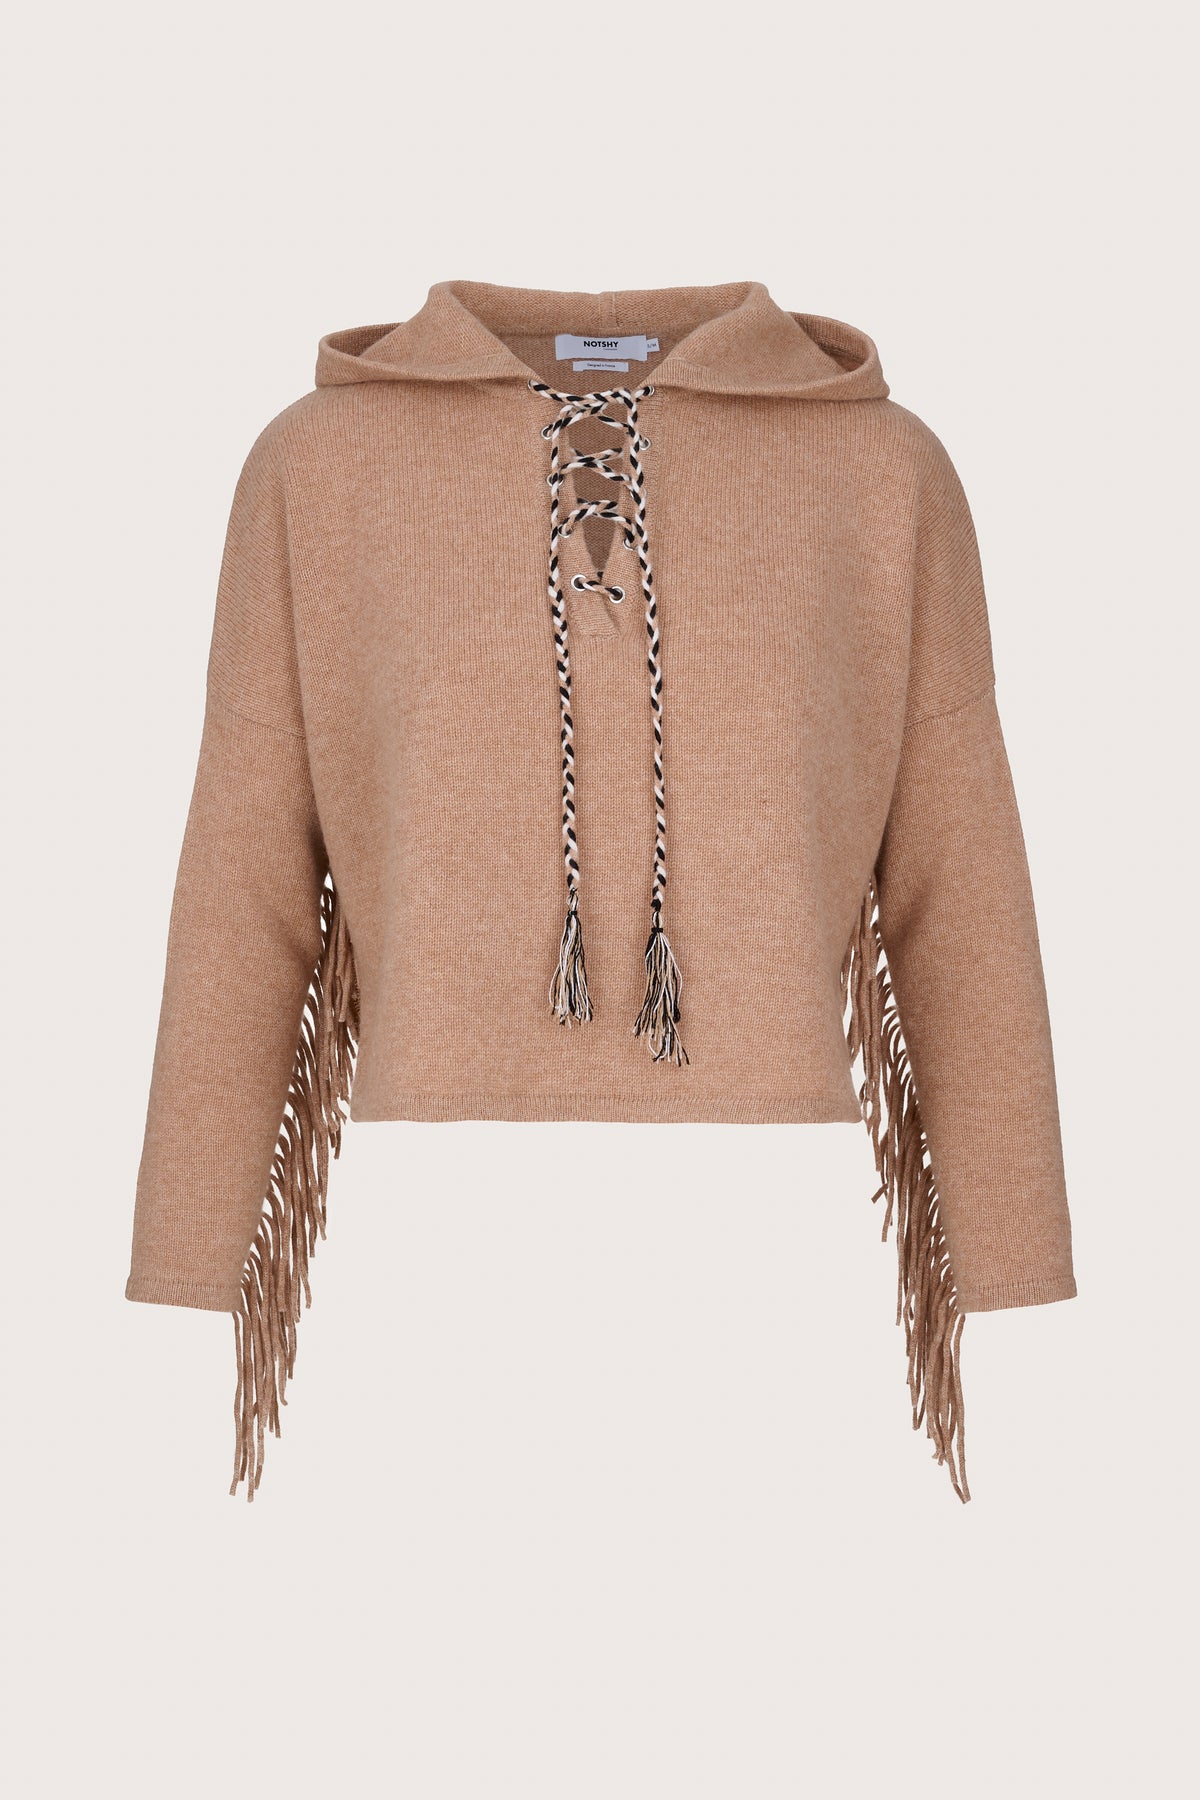 Beige cashmere cropped jumper with a hood and fringe detailing